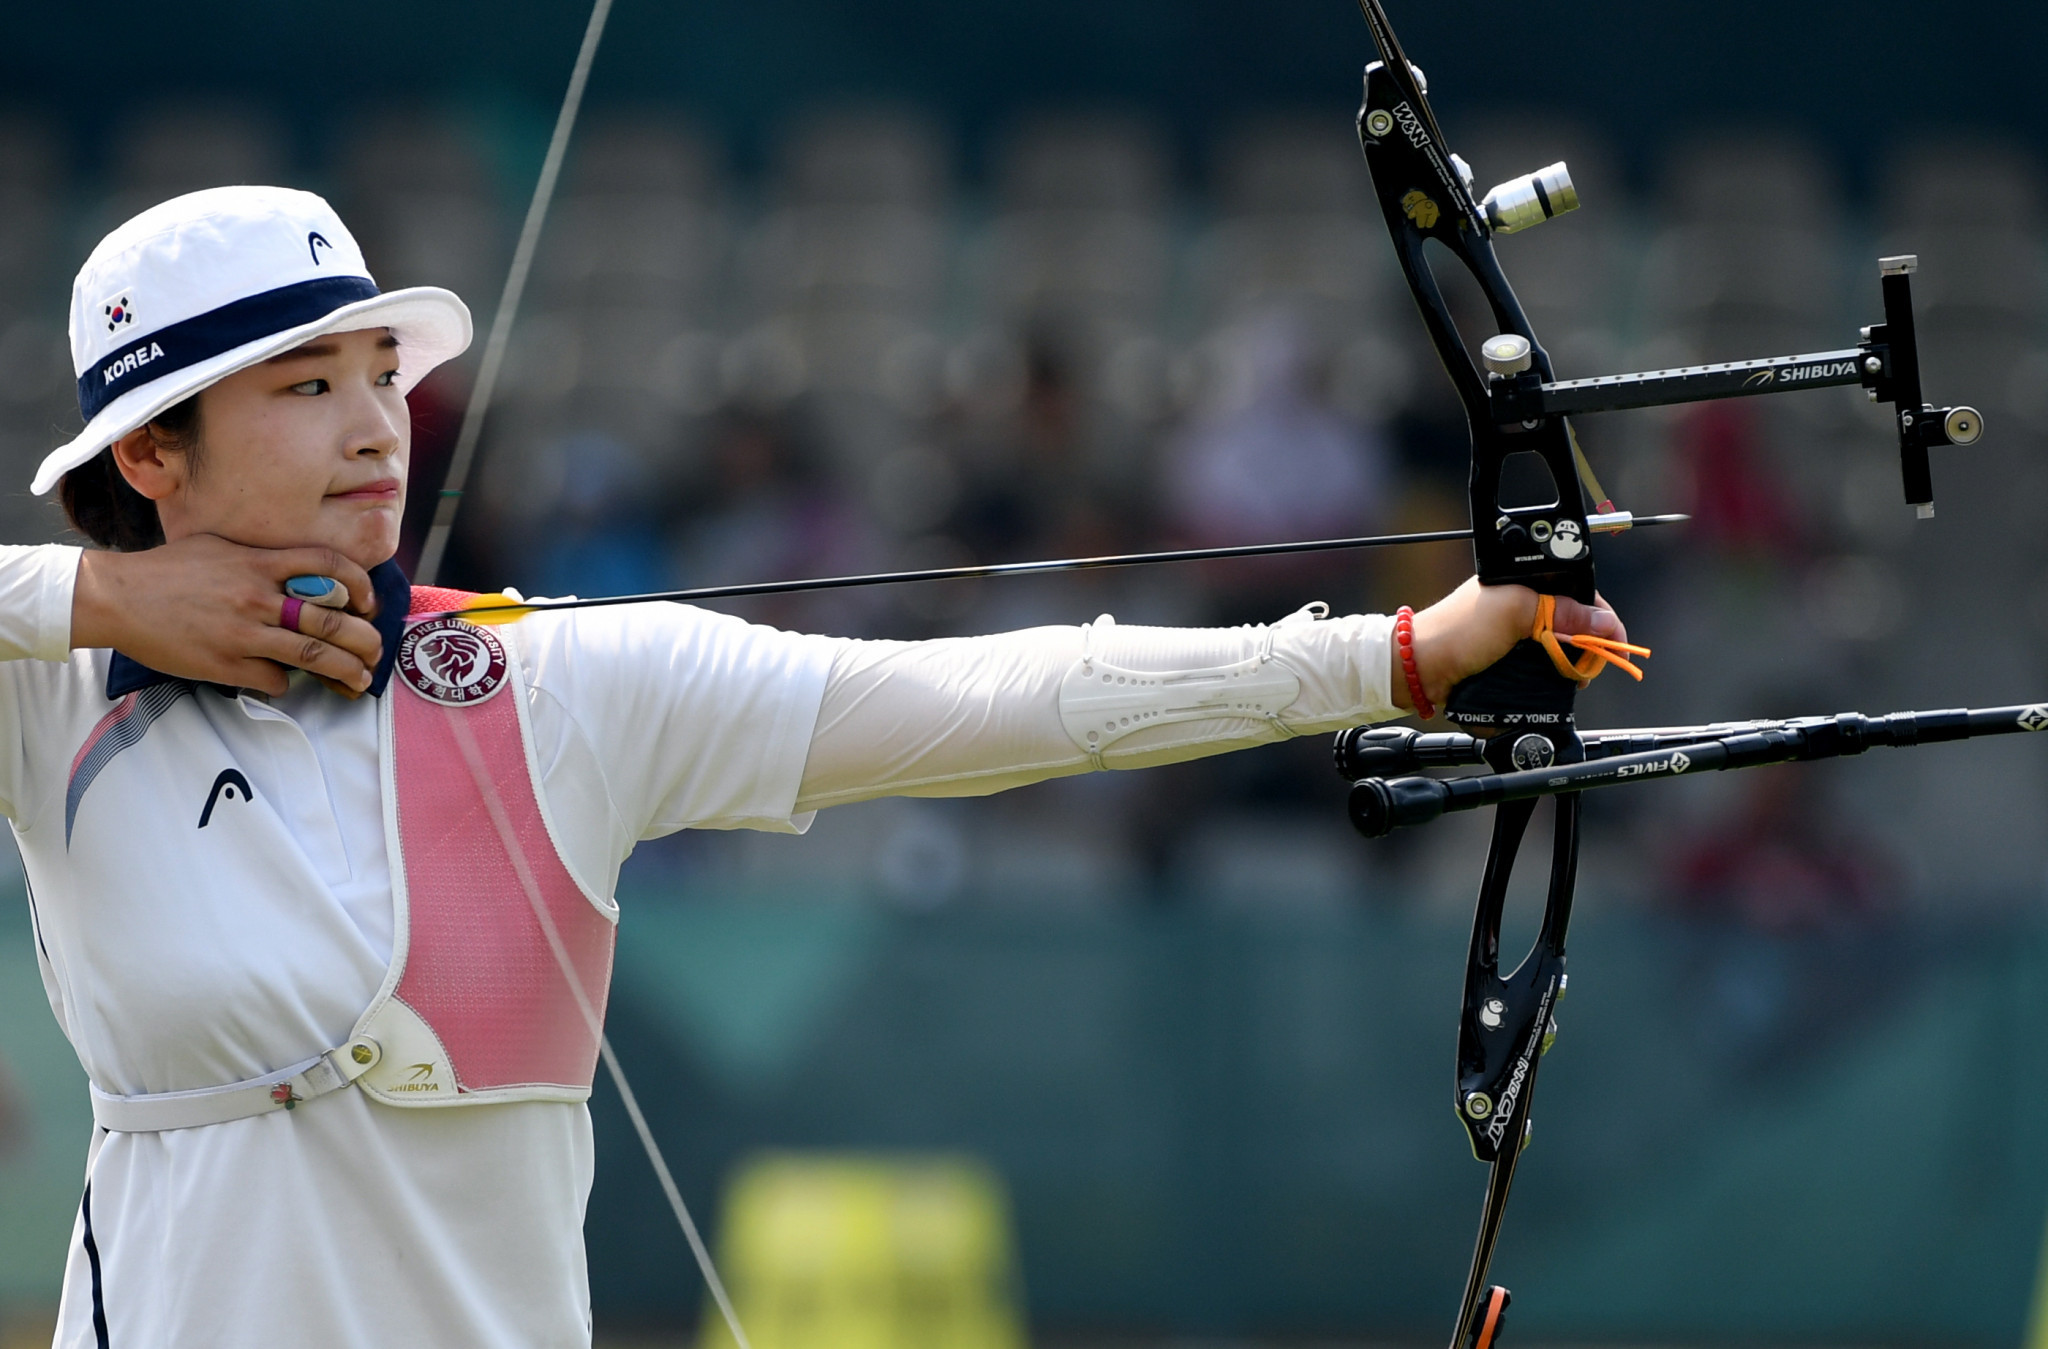 World record holder Kang Chae Young held off a strong challenge from three fellow South Koreans to take first place in the women’s recurve qualification standings at the Indoor Archery World Series event in Nîmes in France ©Getty Images